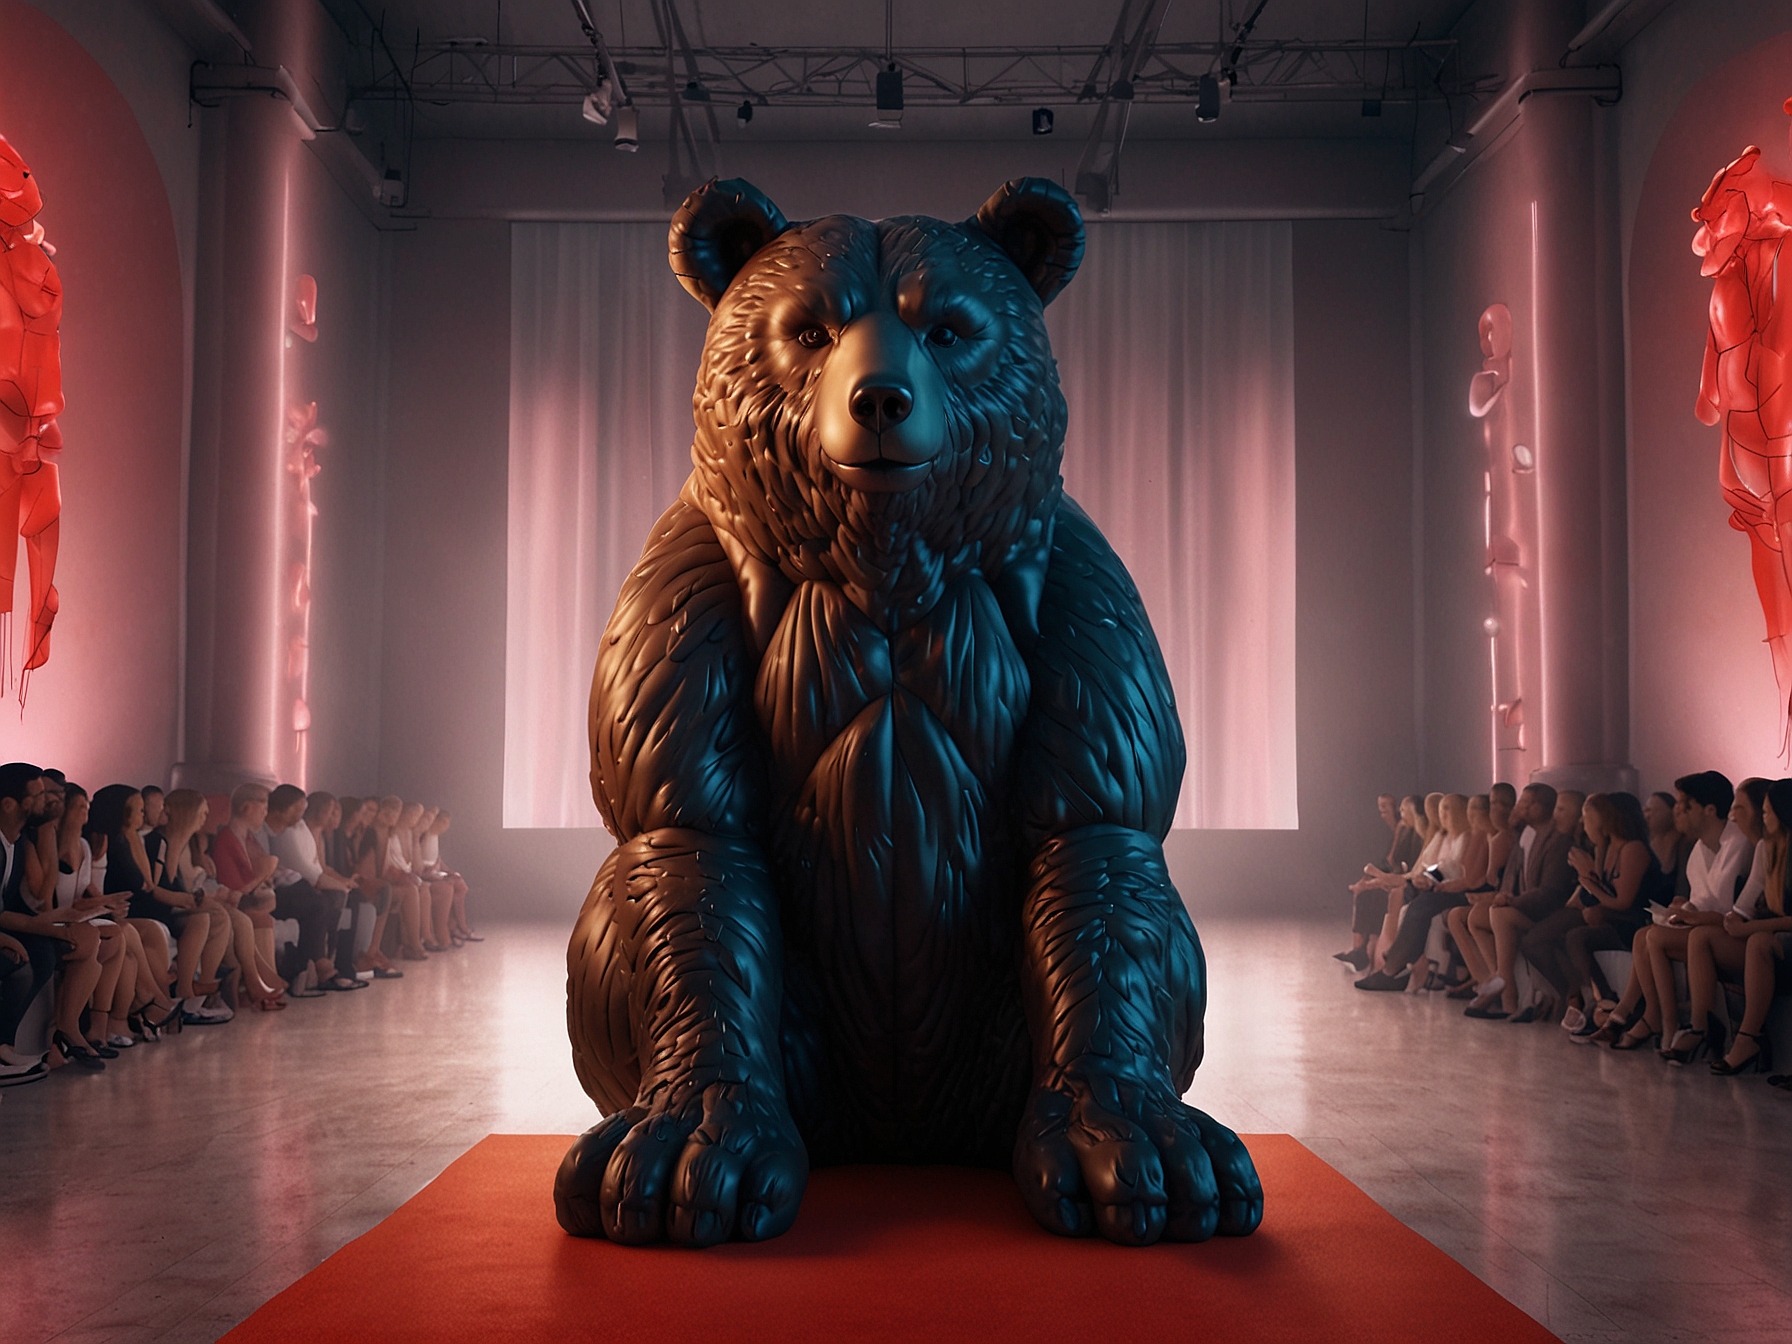 An inflatable bear centerpiece standing amid vibrant fluorescent lighting and red carpet sets the whimsical tone for Dhruv Kapoor's SS25 collection at Milan Fashion Week.